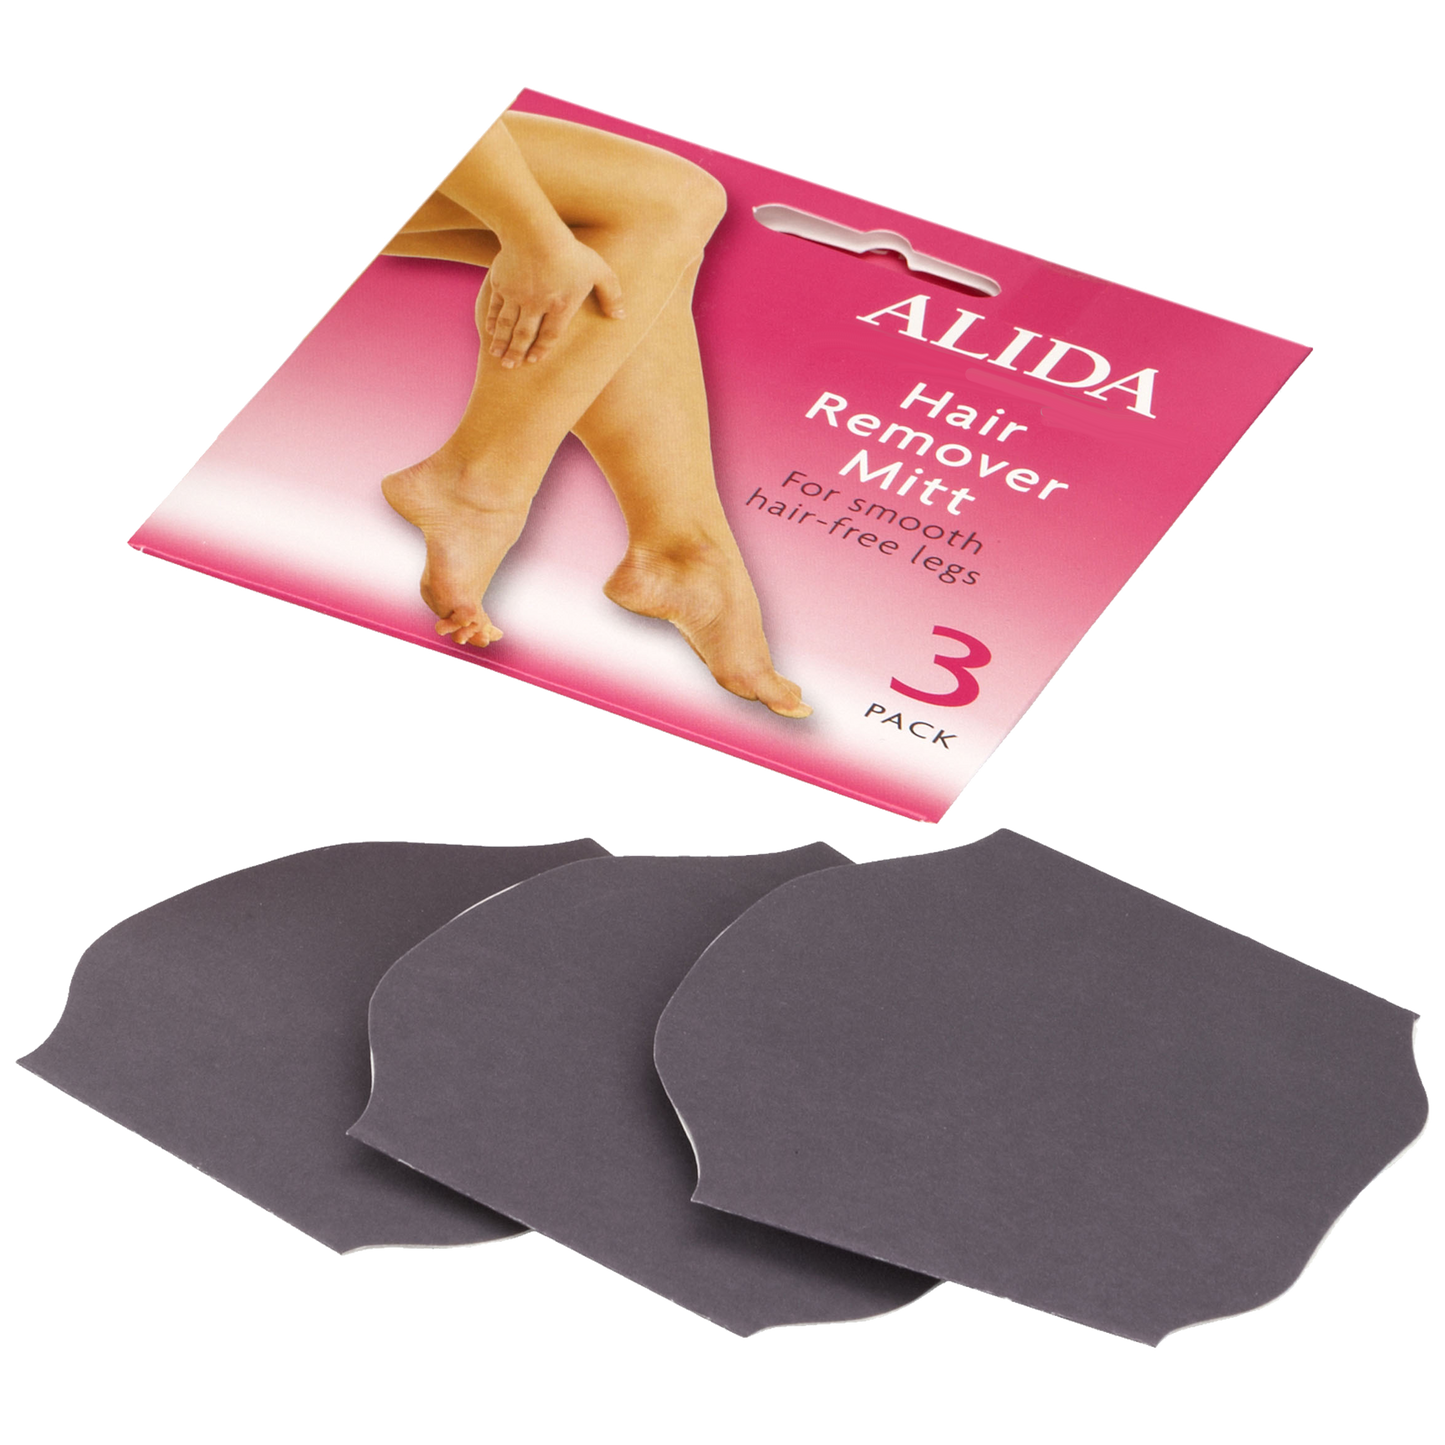 Alida Hair Remover Mitt for smooth hair-free legs from Alida.co.uk